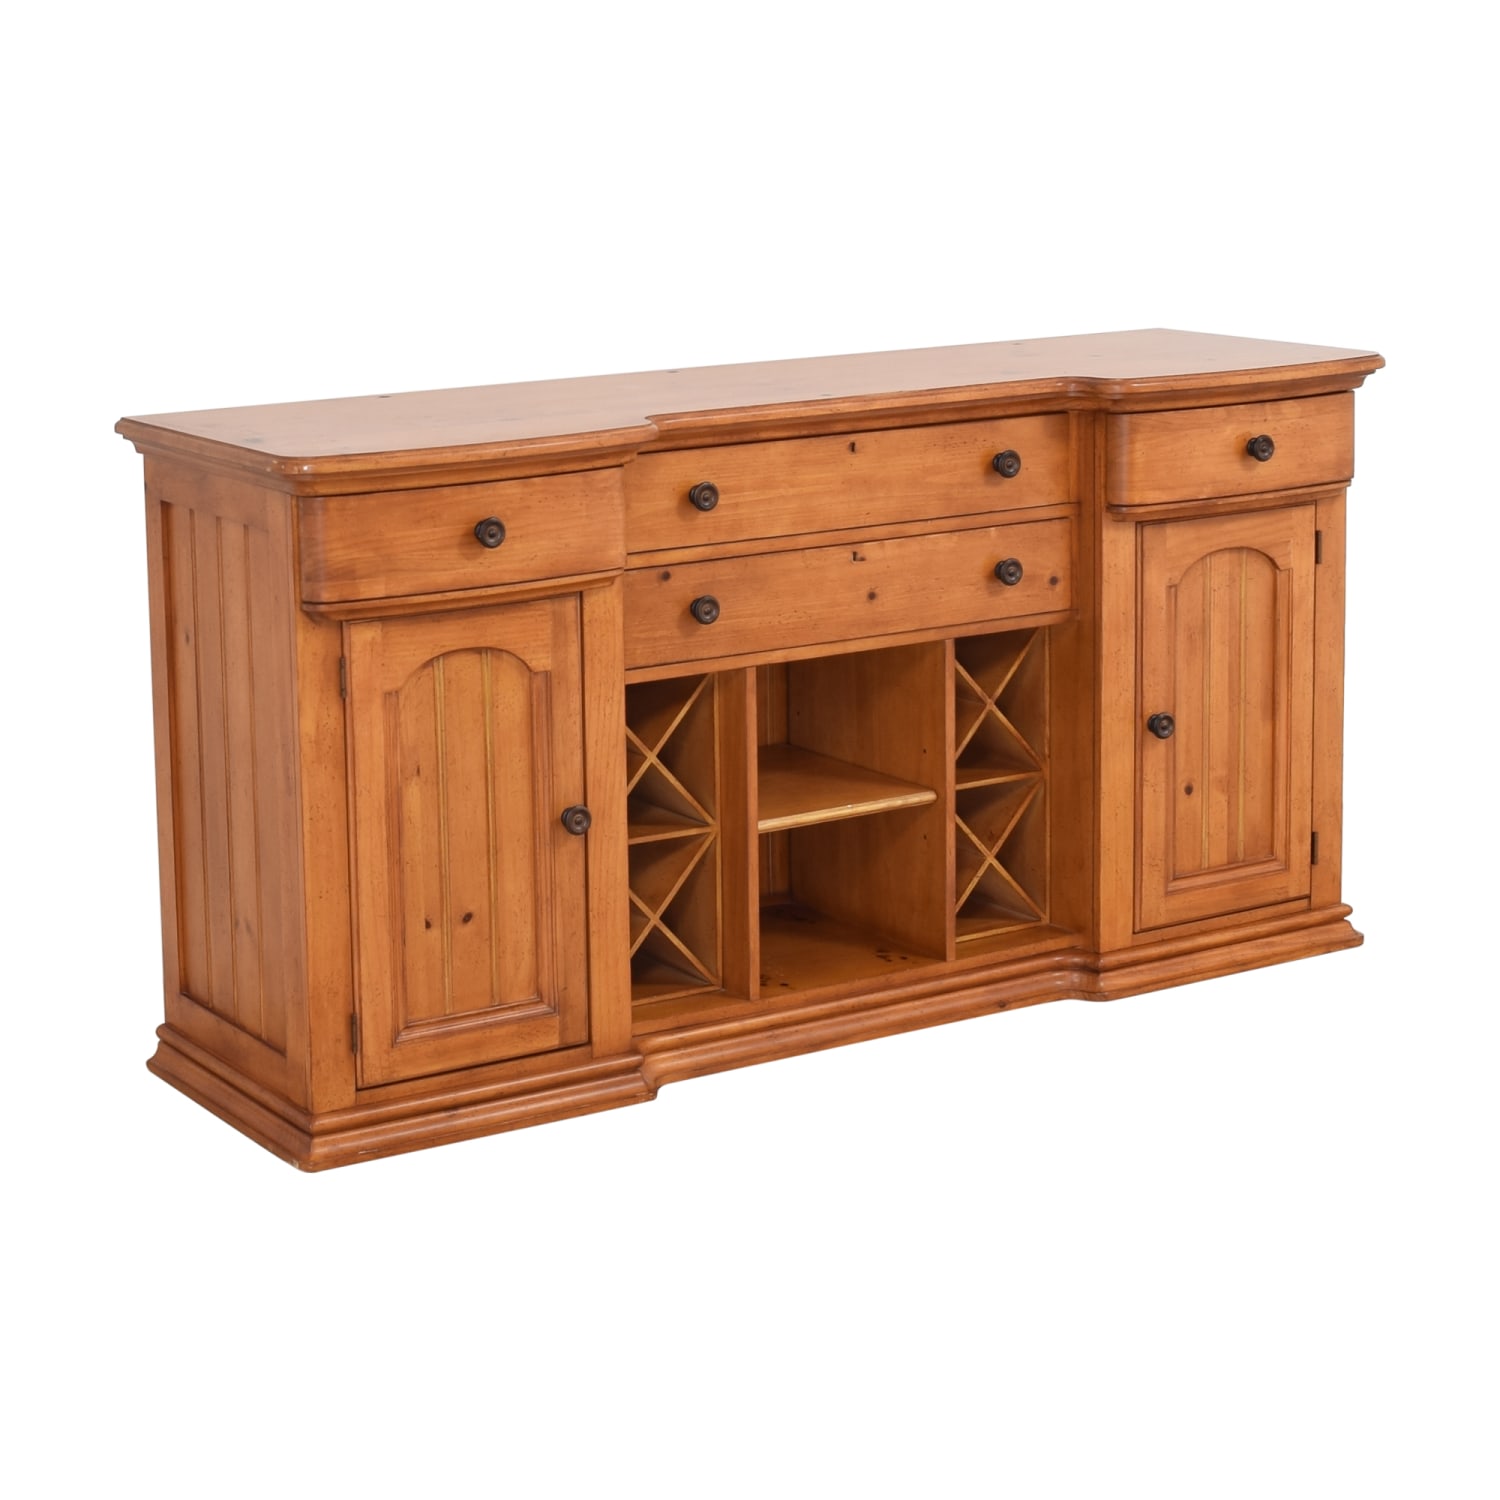 https://res.cloudinary.com/dkqtxtobb/image/upload/f_auto,q_auto:best,w_1500/product-assets/155005/stanley-furniture/storage/cabinets-sideboards/second-hand-stanley-furniture-cottage-revival-vineyard-service-cabinet.jpeg